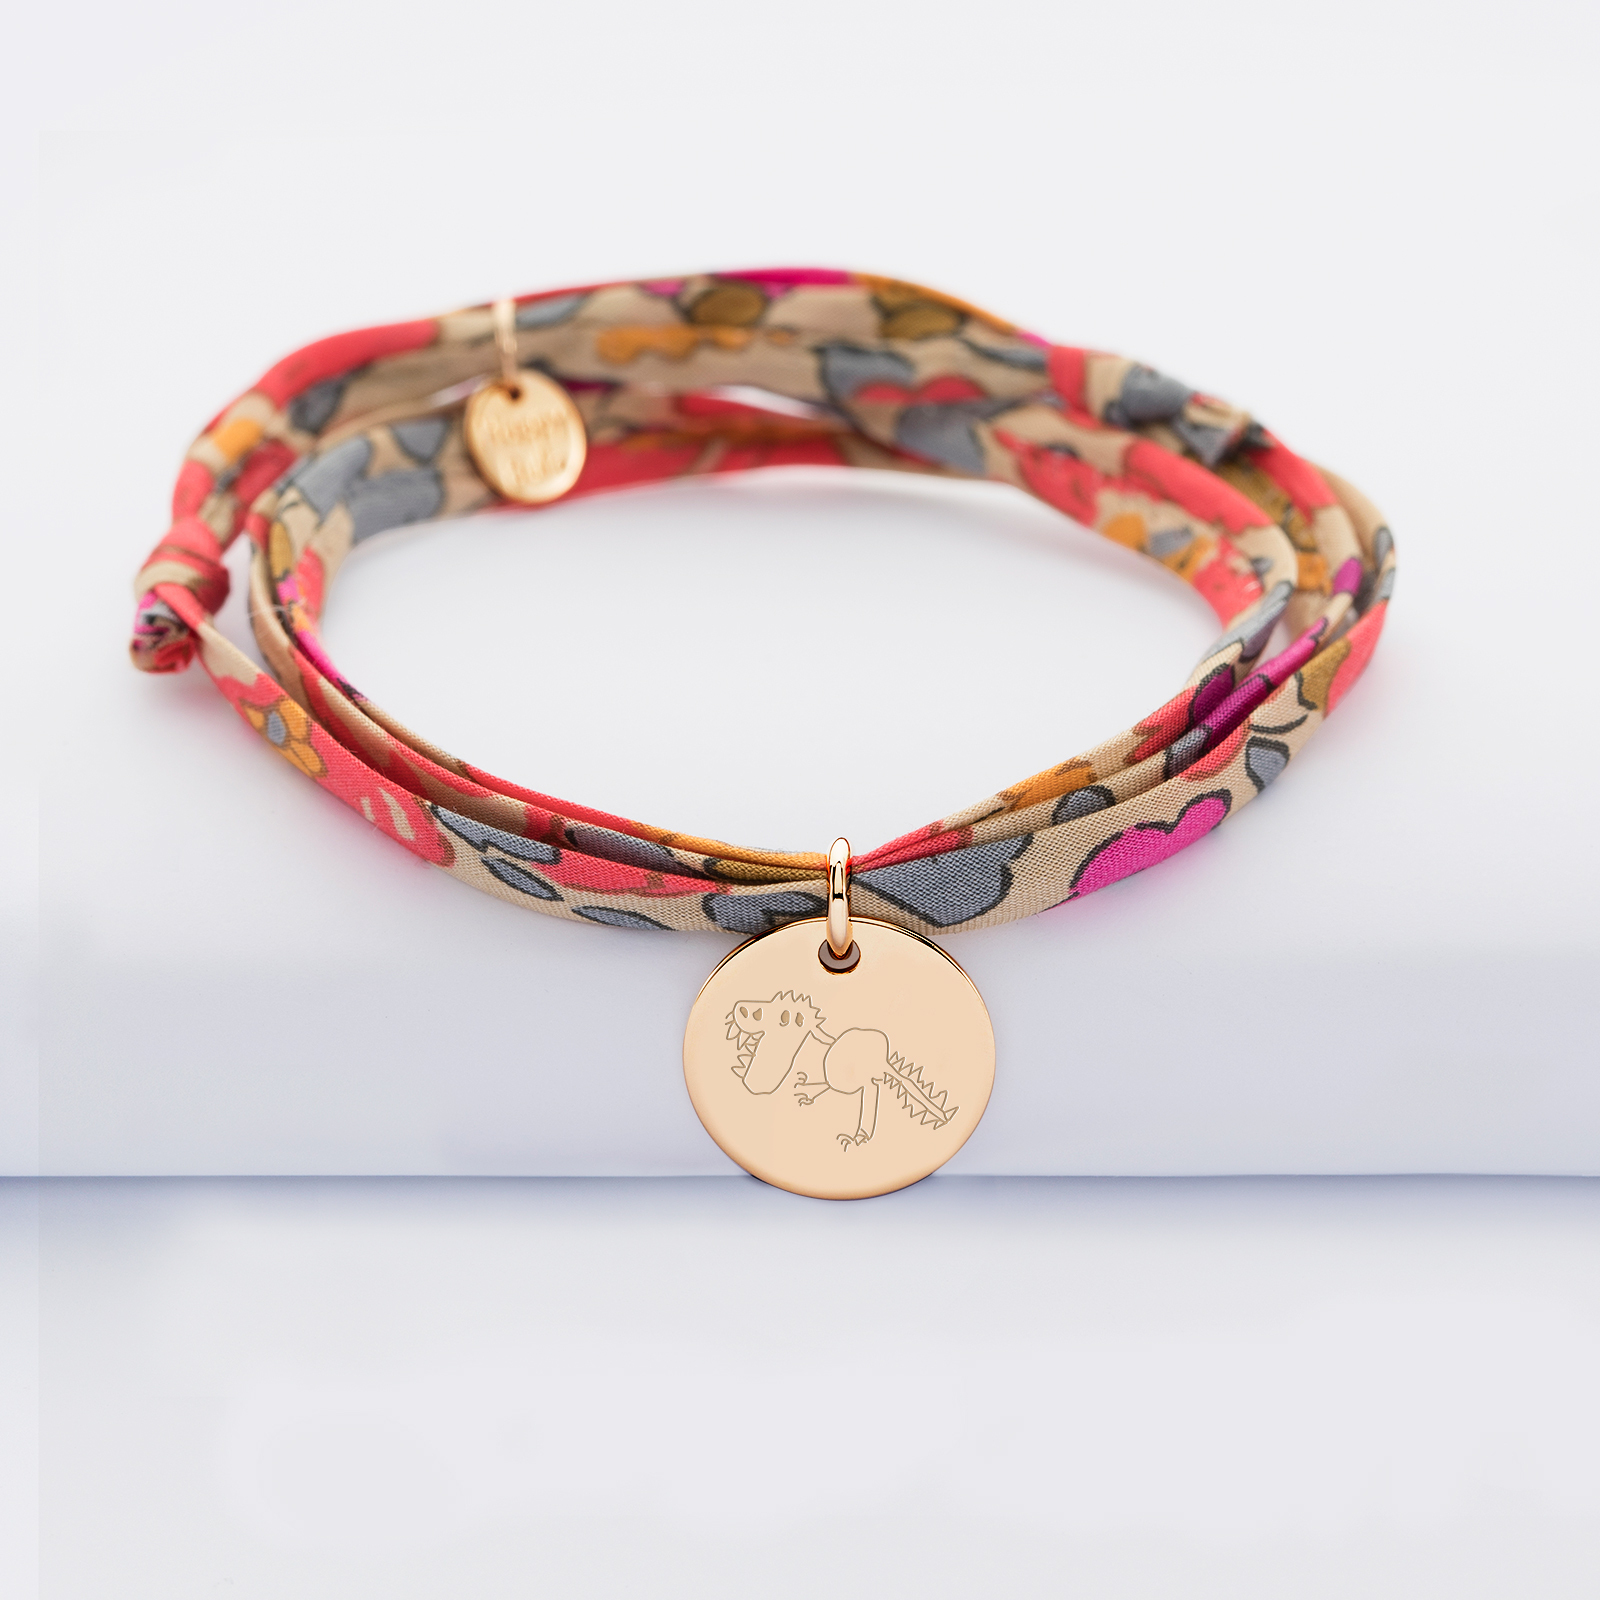 Personalised 3 turn Liberty bracelet with personalised engraved gold plated medallion 15 mm - tutorial